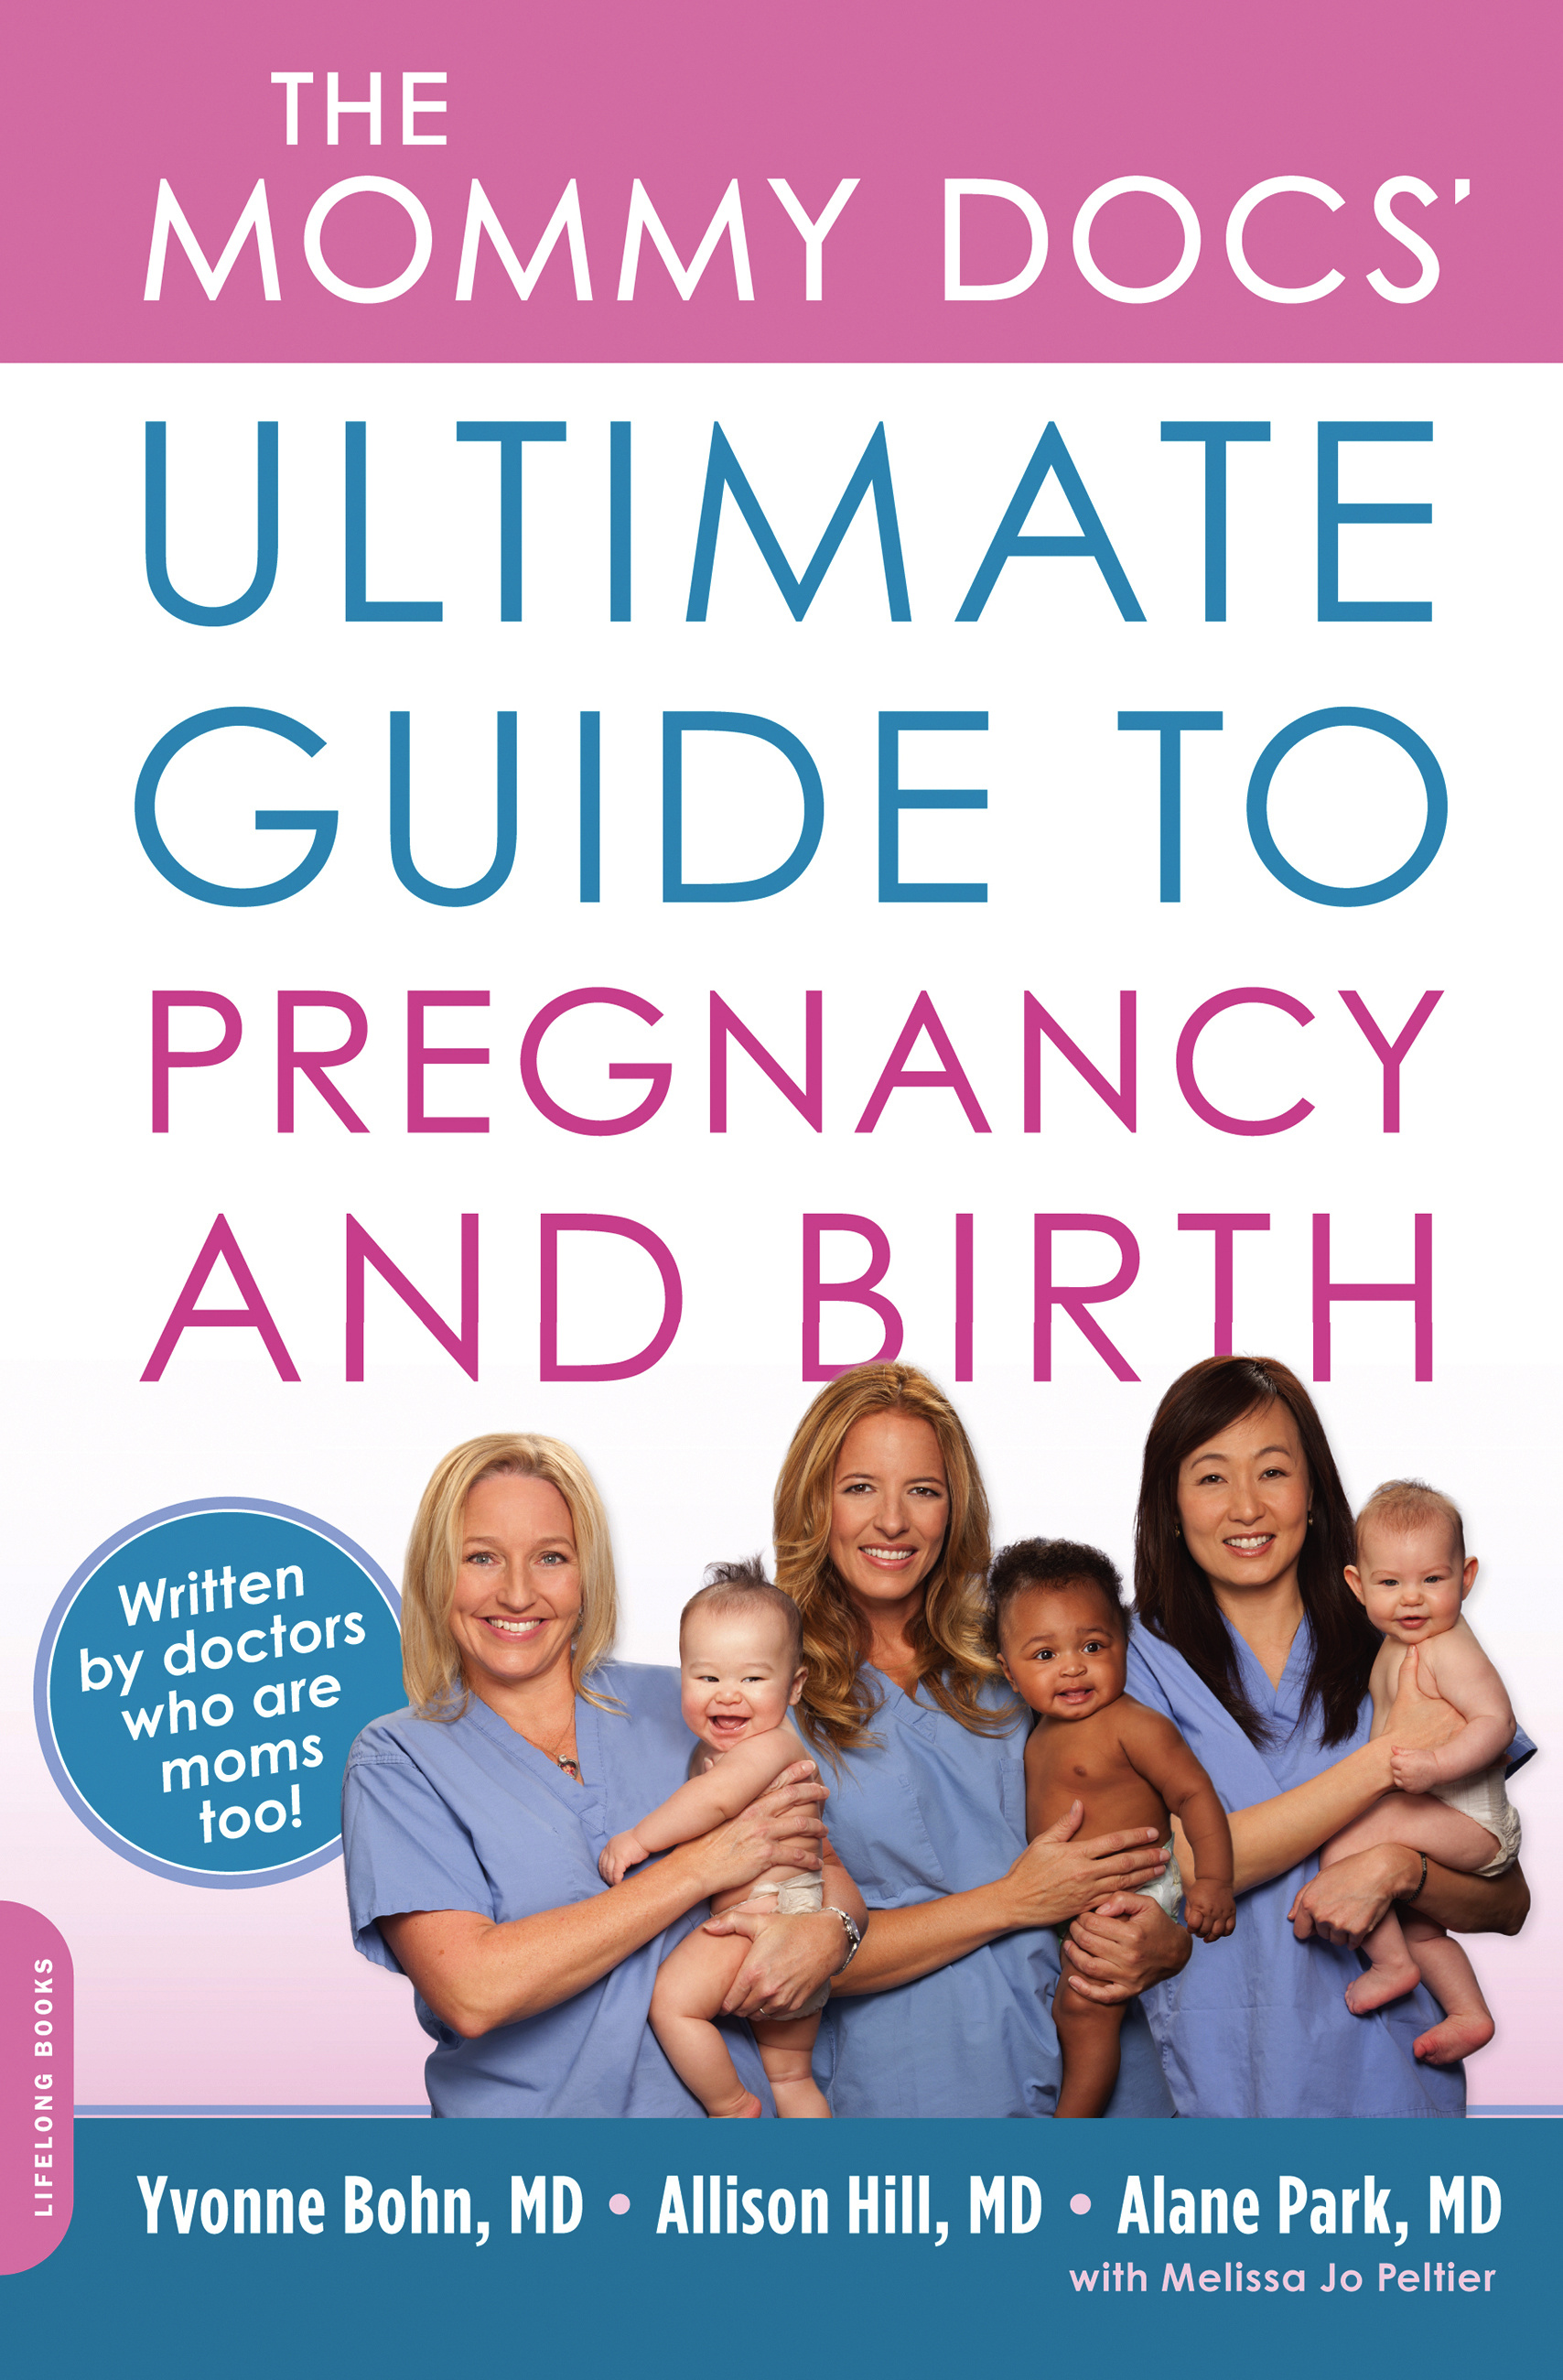 The Mommy Docs Ultimate Guide to Pregnancy and Birth by Yvonne Bohn Hachette Book Group